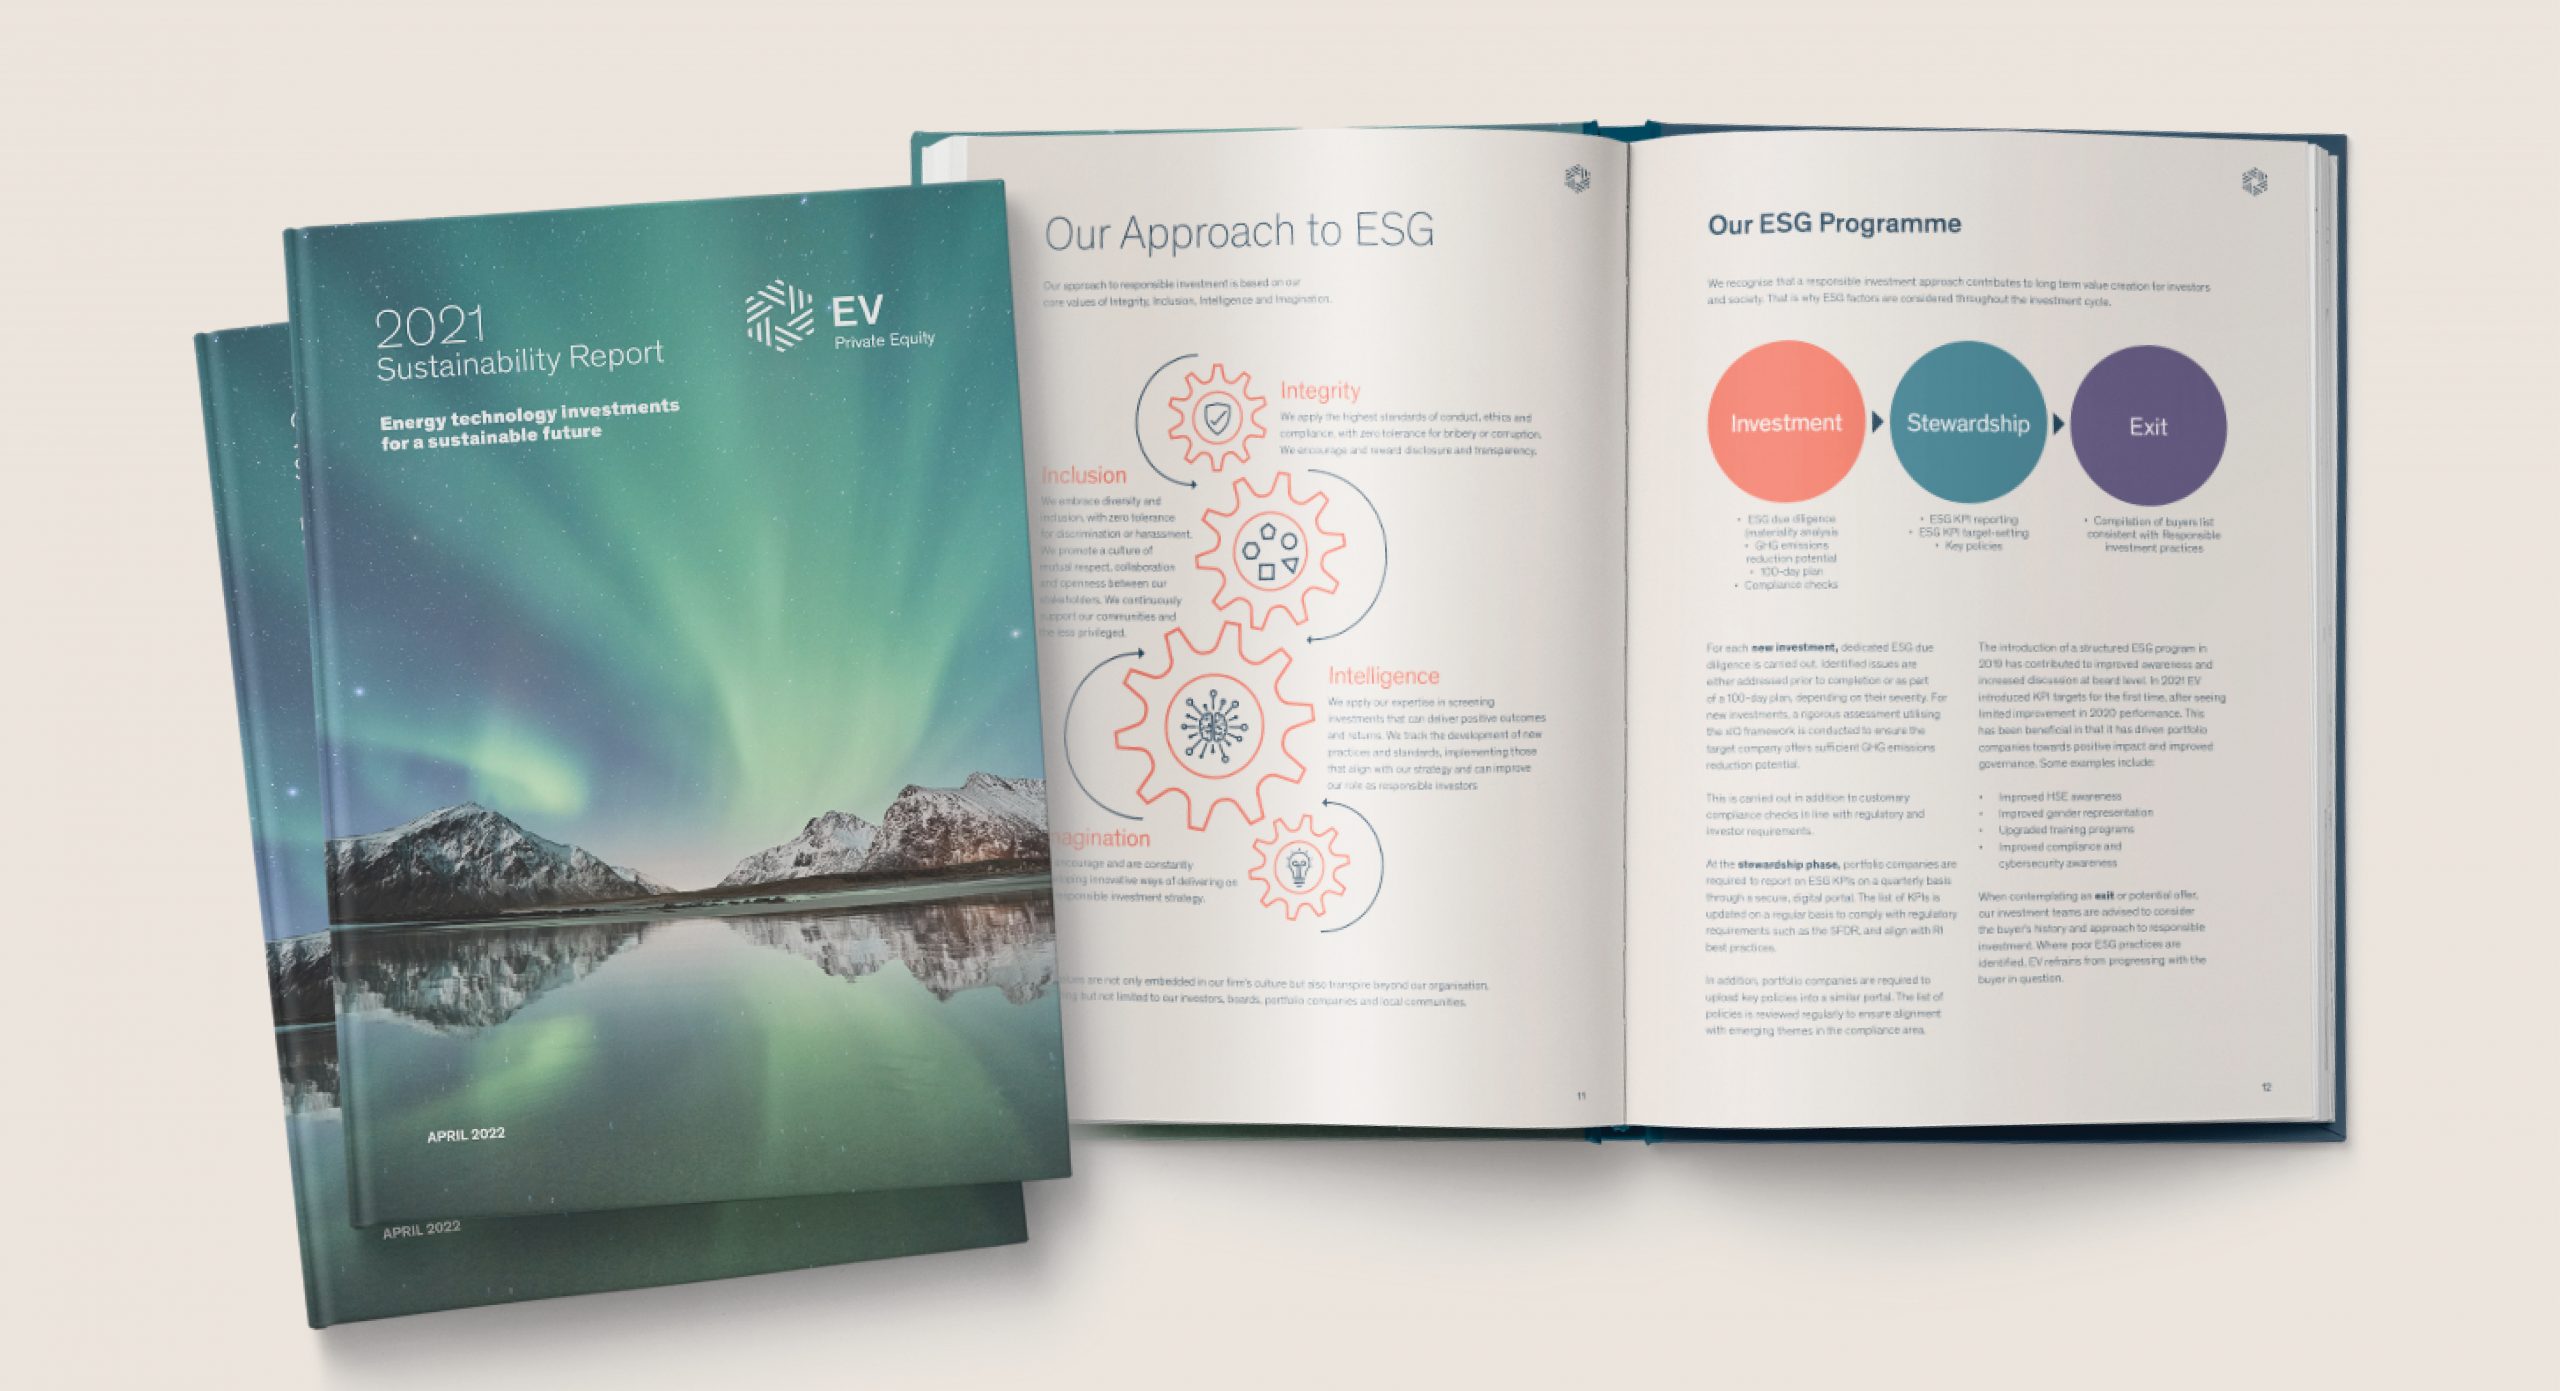 EV Private Equity 2021 Sustainability Report